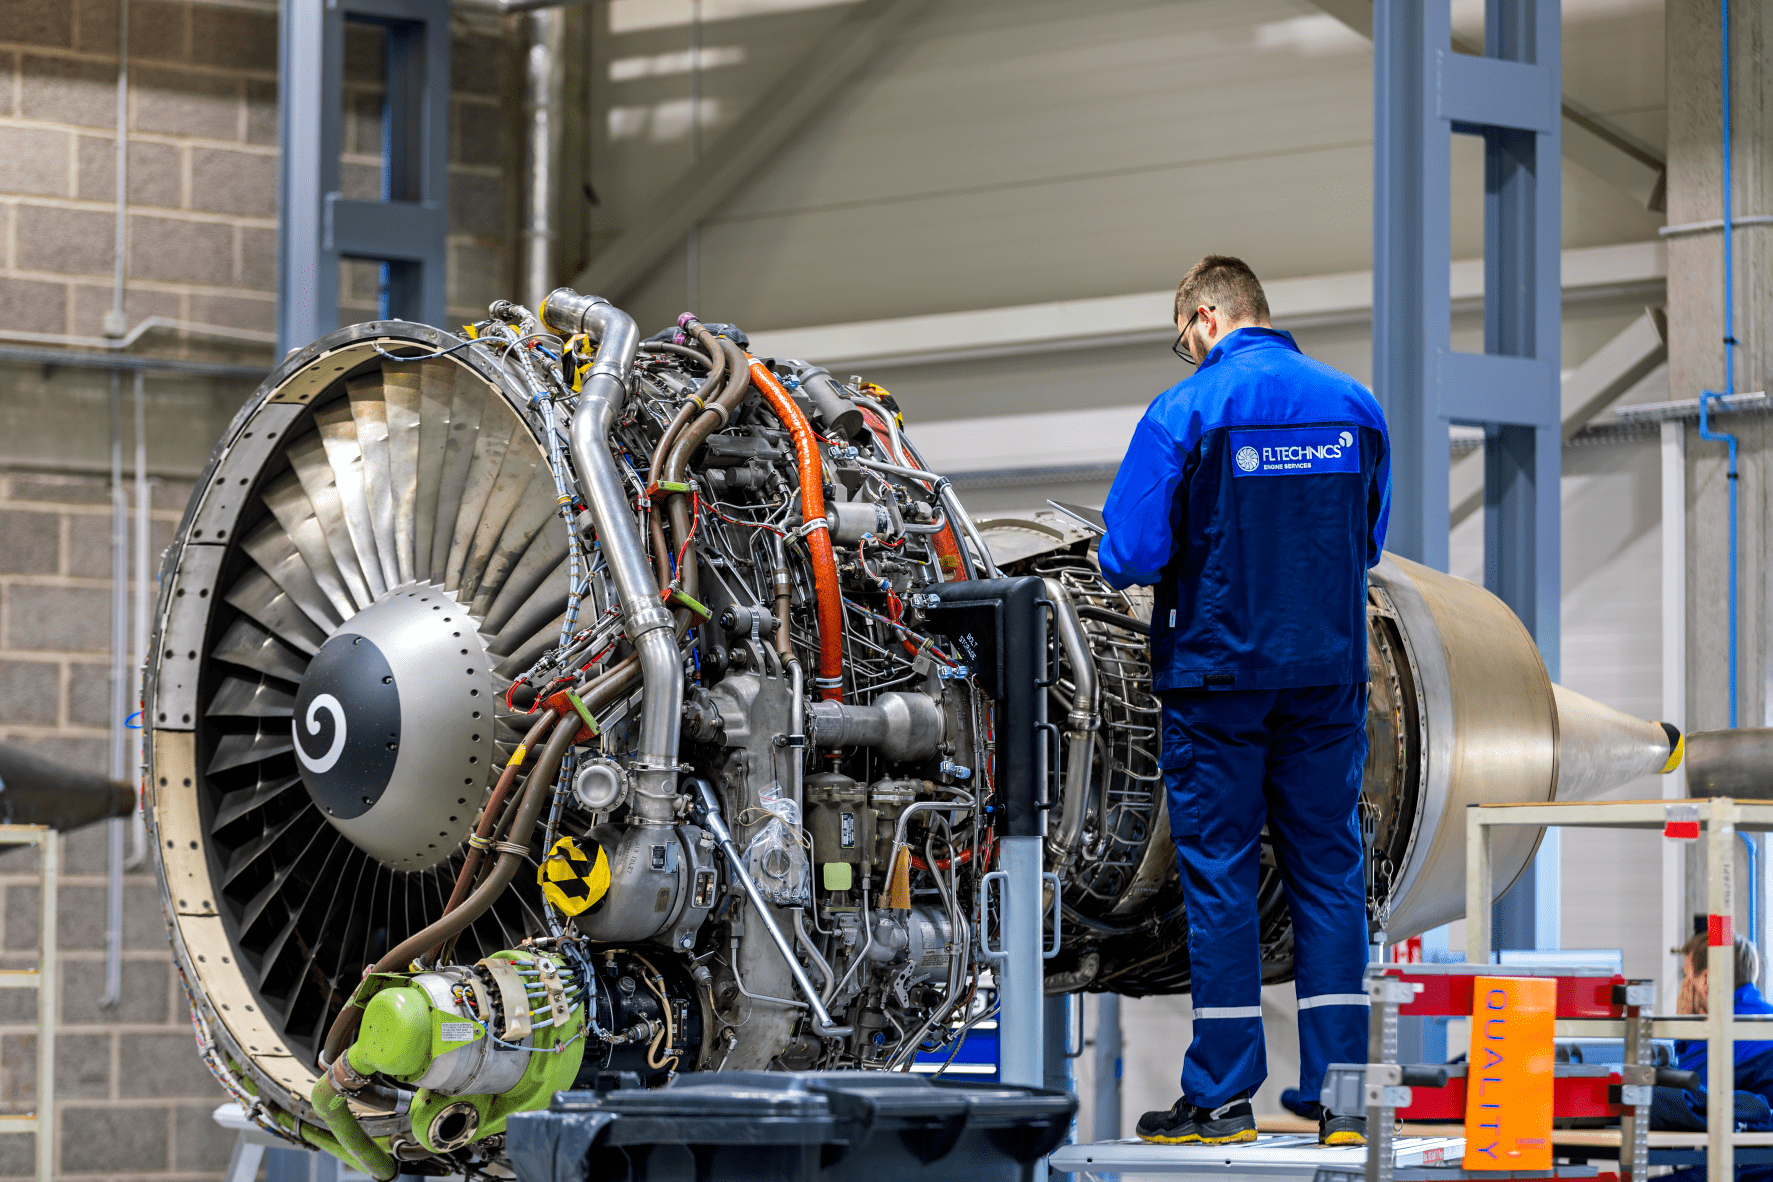 New partnership in MRO industry: FL Technics partners with SETAERO to deliver tailor-made solutions for aircraft parts and materials